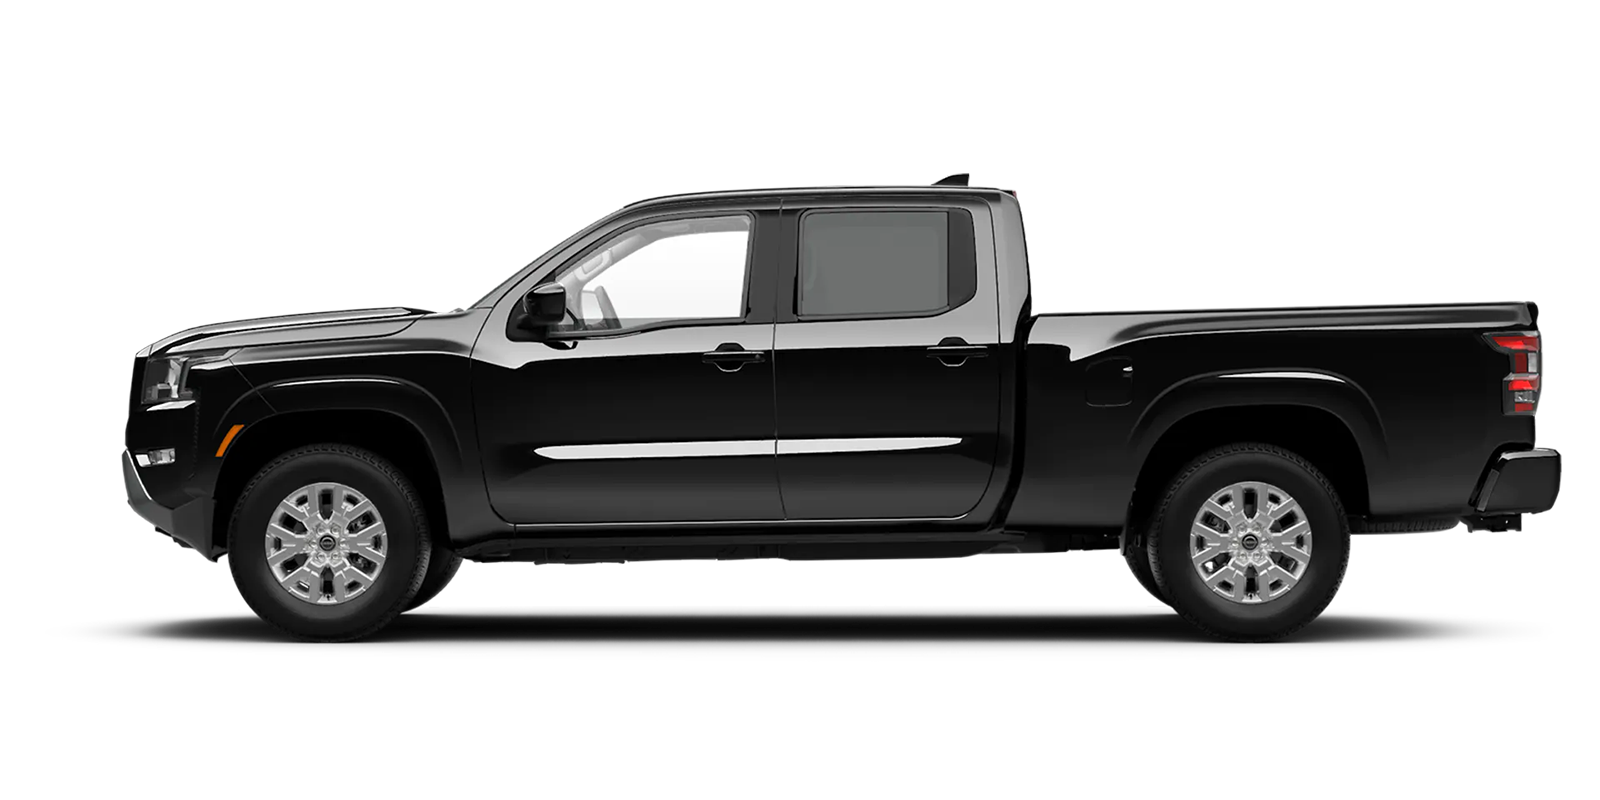 2022 Frontier Crew Cab Long Bed SV 4x4 in Super Black | Rusty Wallace Nissan in Knoxville TN